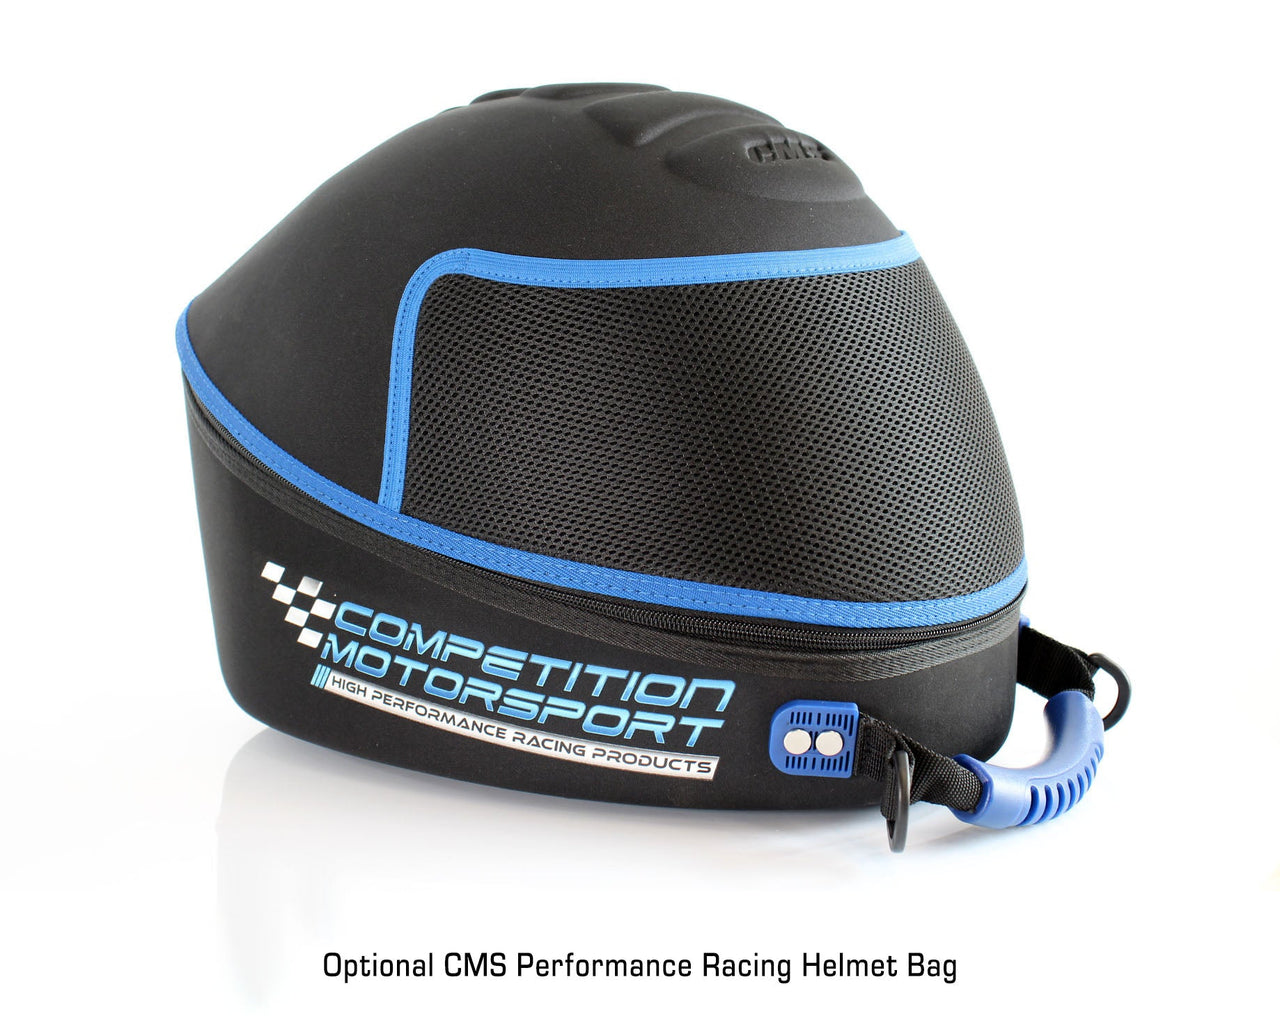 Bell GT6 RD Carbon Fiber Helmet SA2020 with Communications Installed - Competition Motorsport